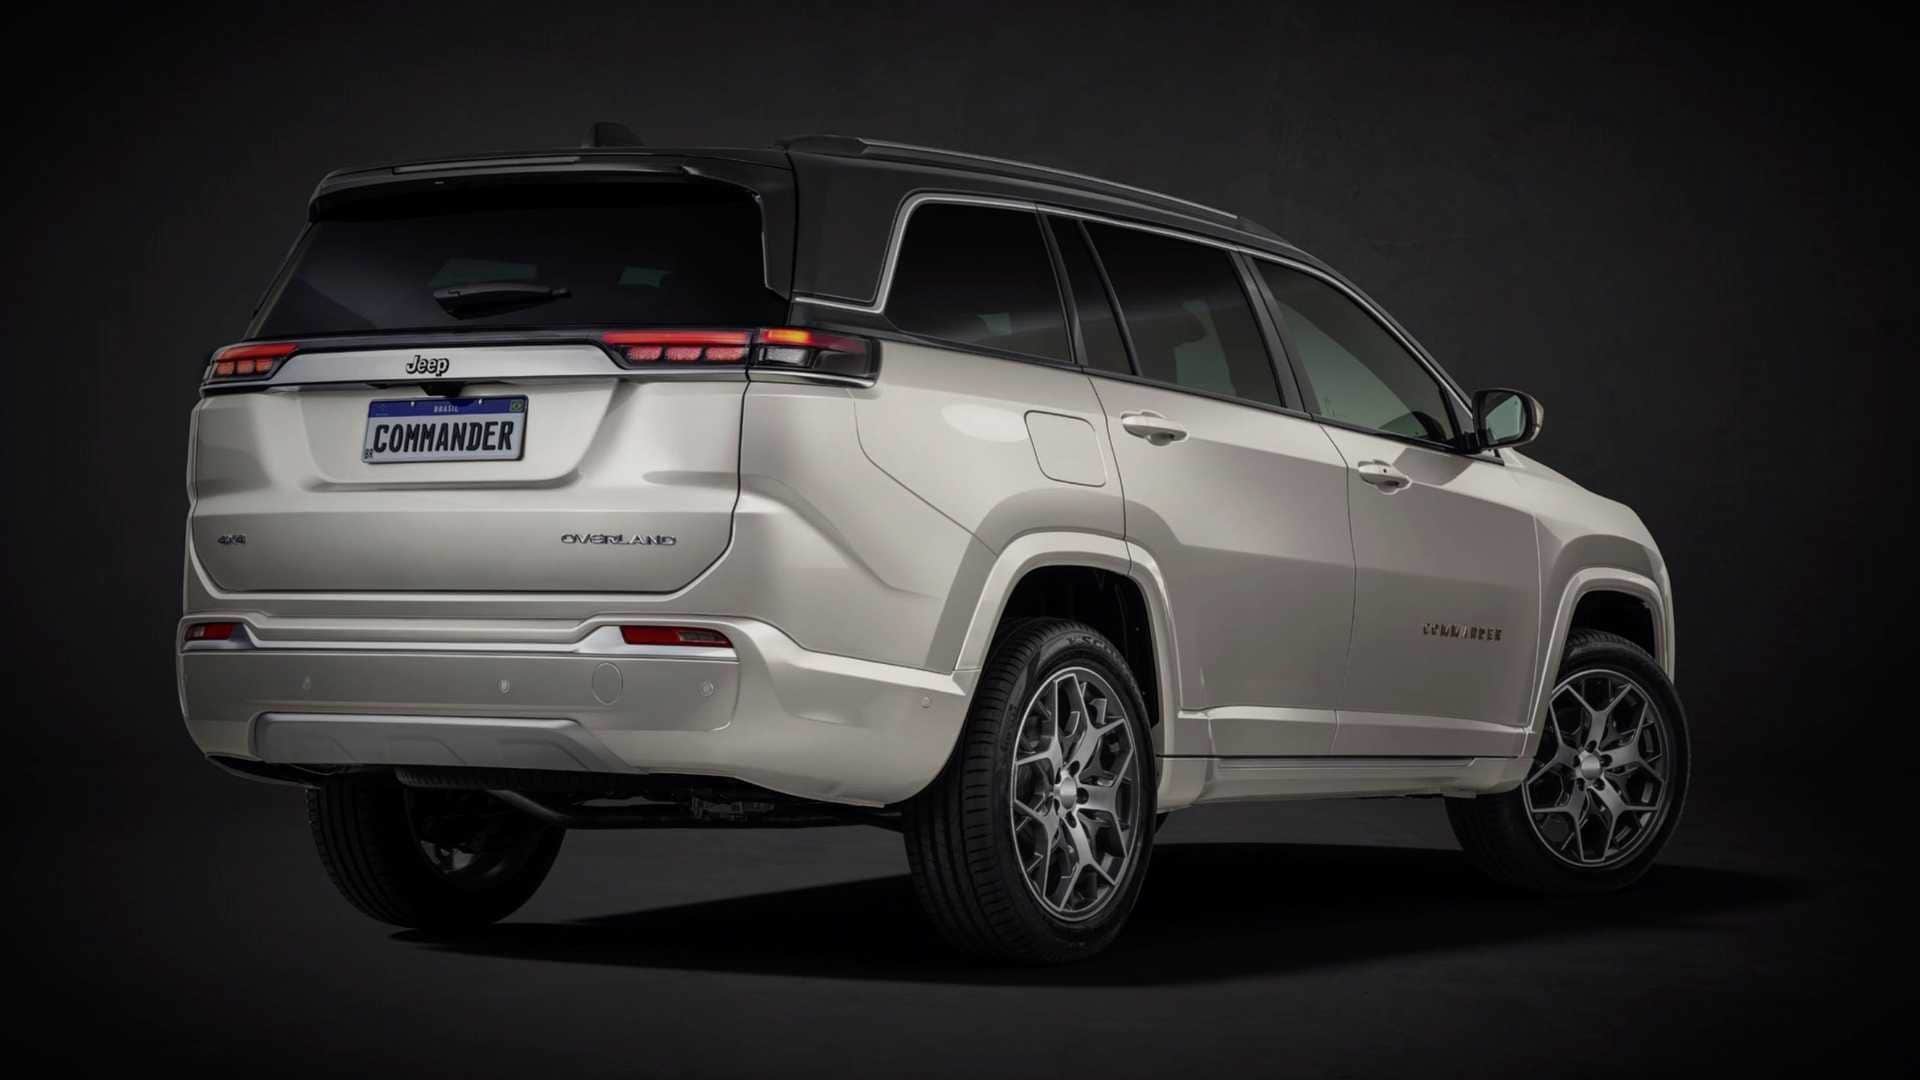 The Meridian has a noticeably extended rear overhang compared to the Compass. Image: Jeep